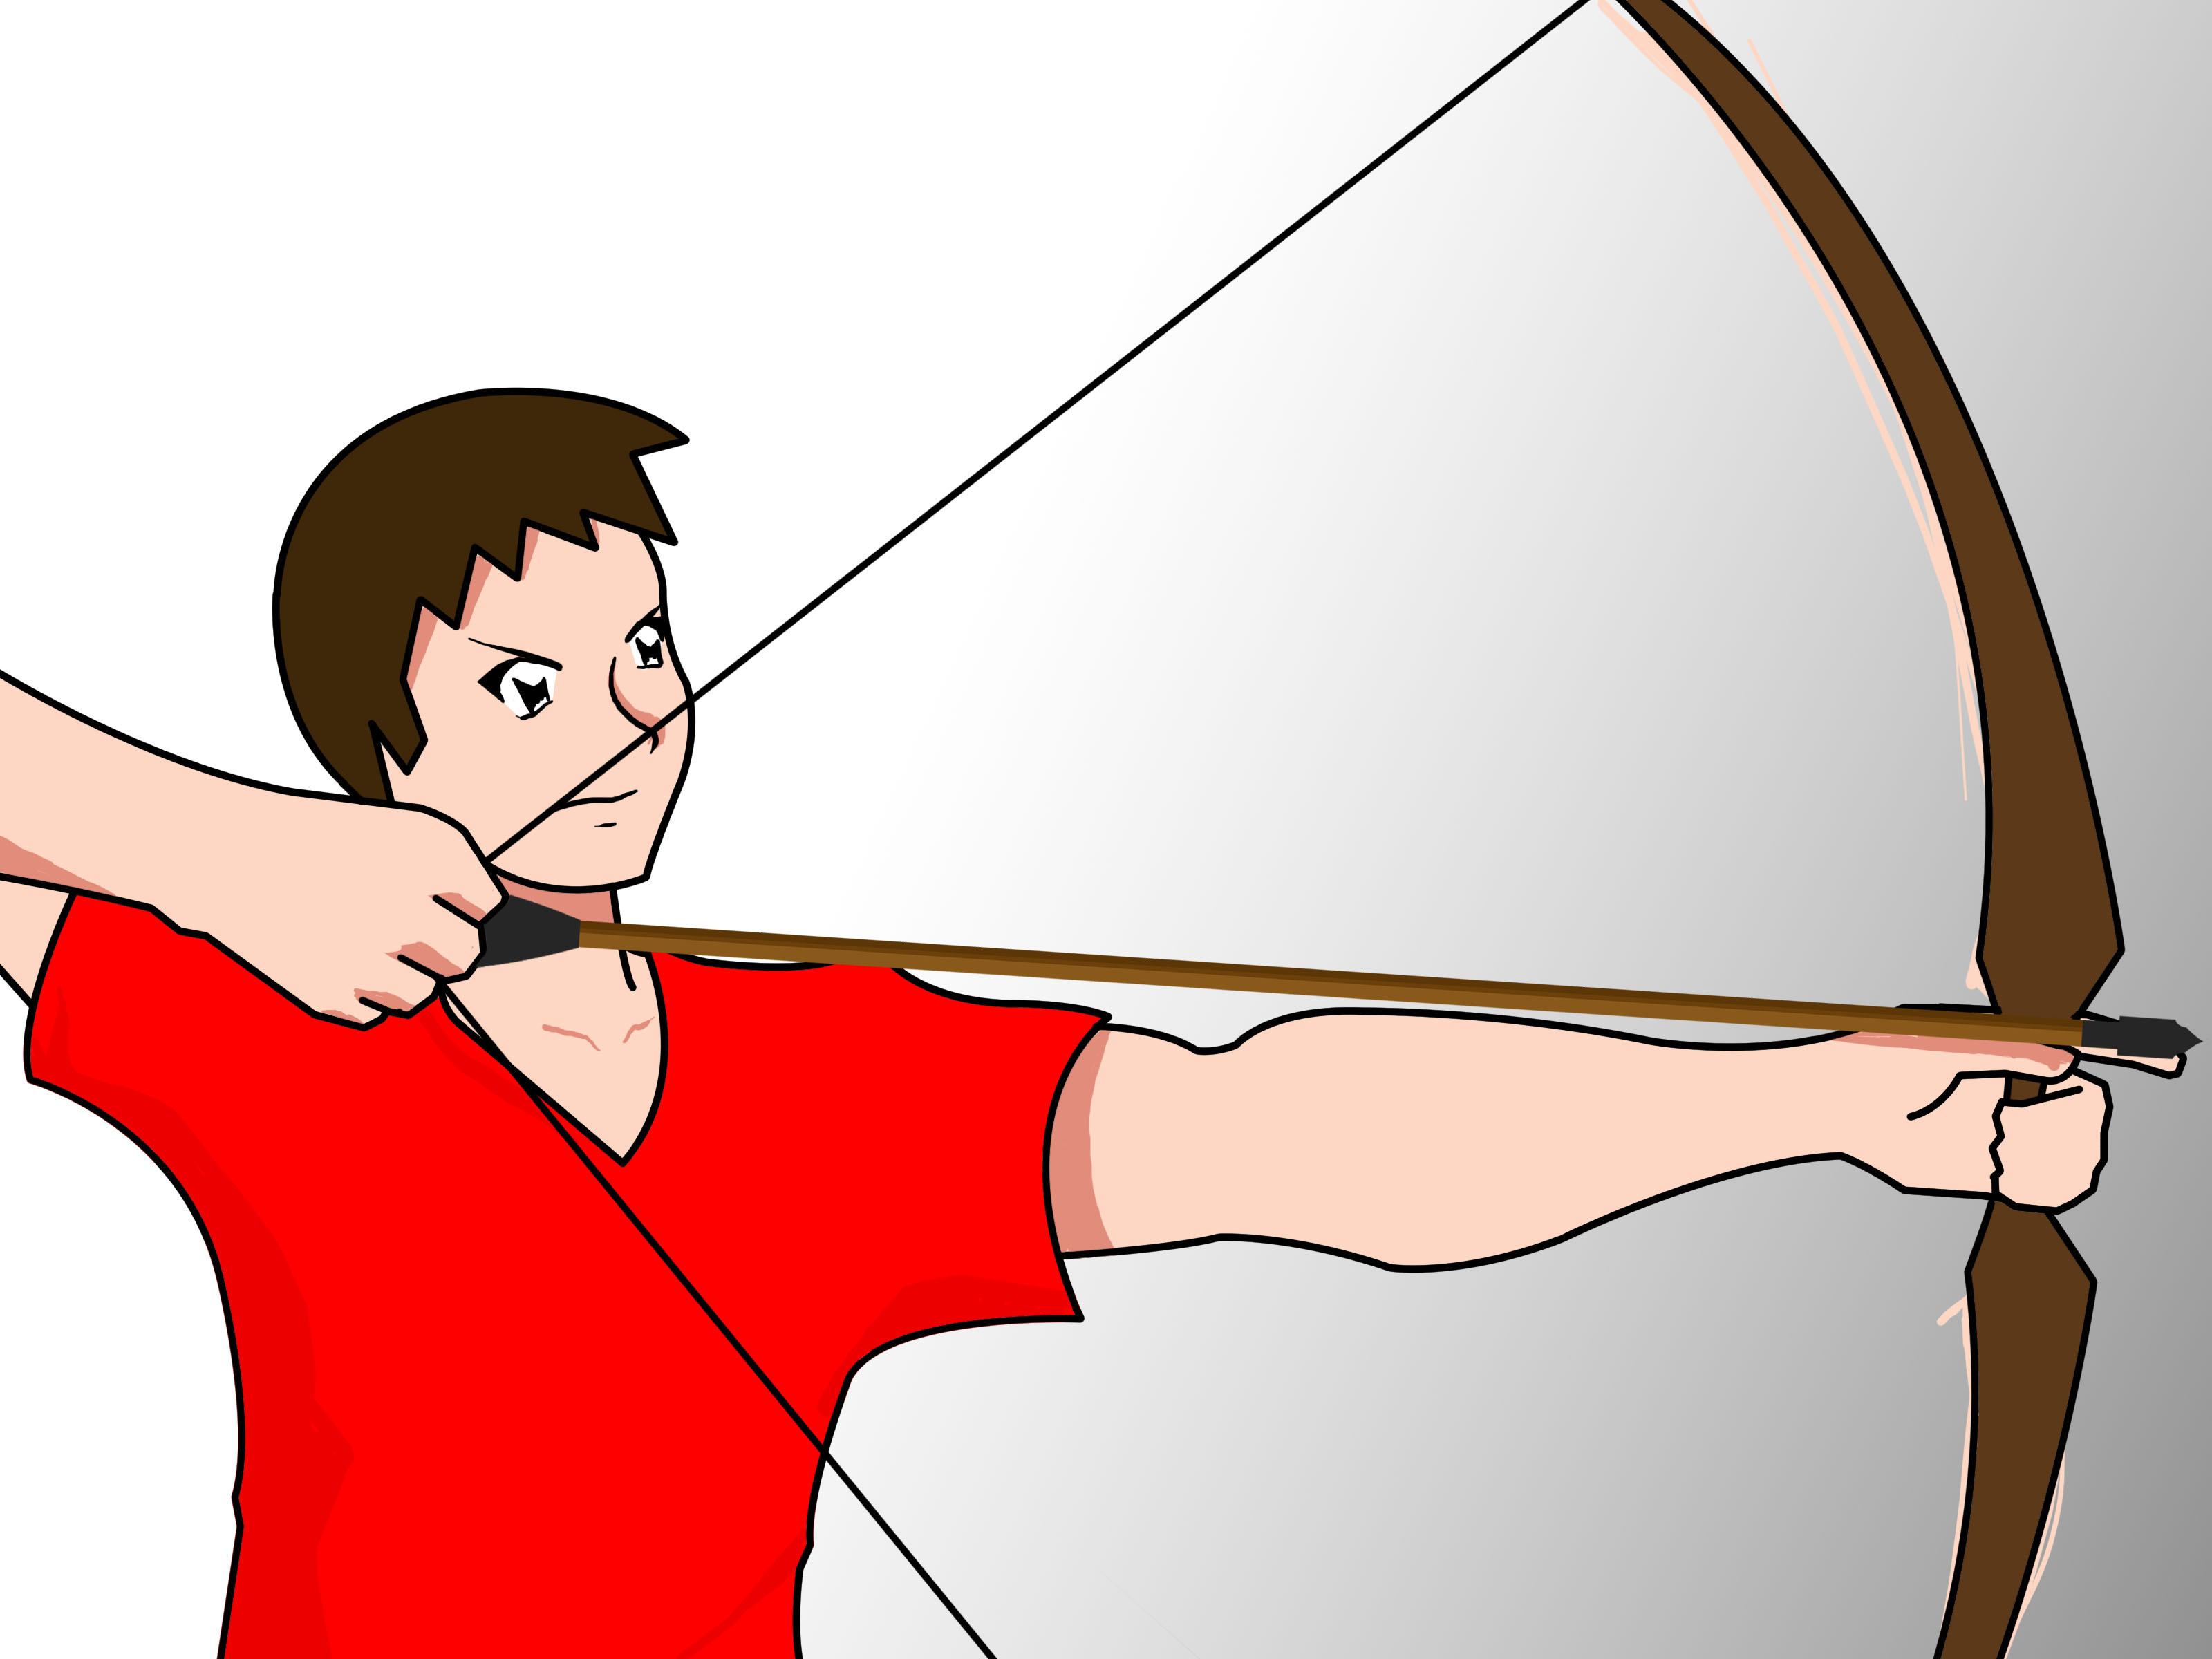 3 Ways to Correctly Shoot a Compound Bow - wikiHow